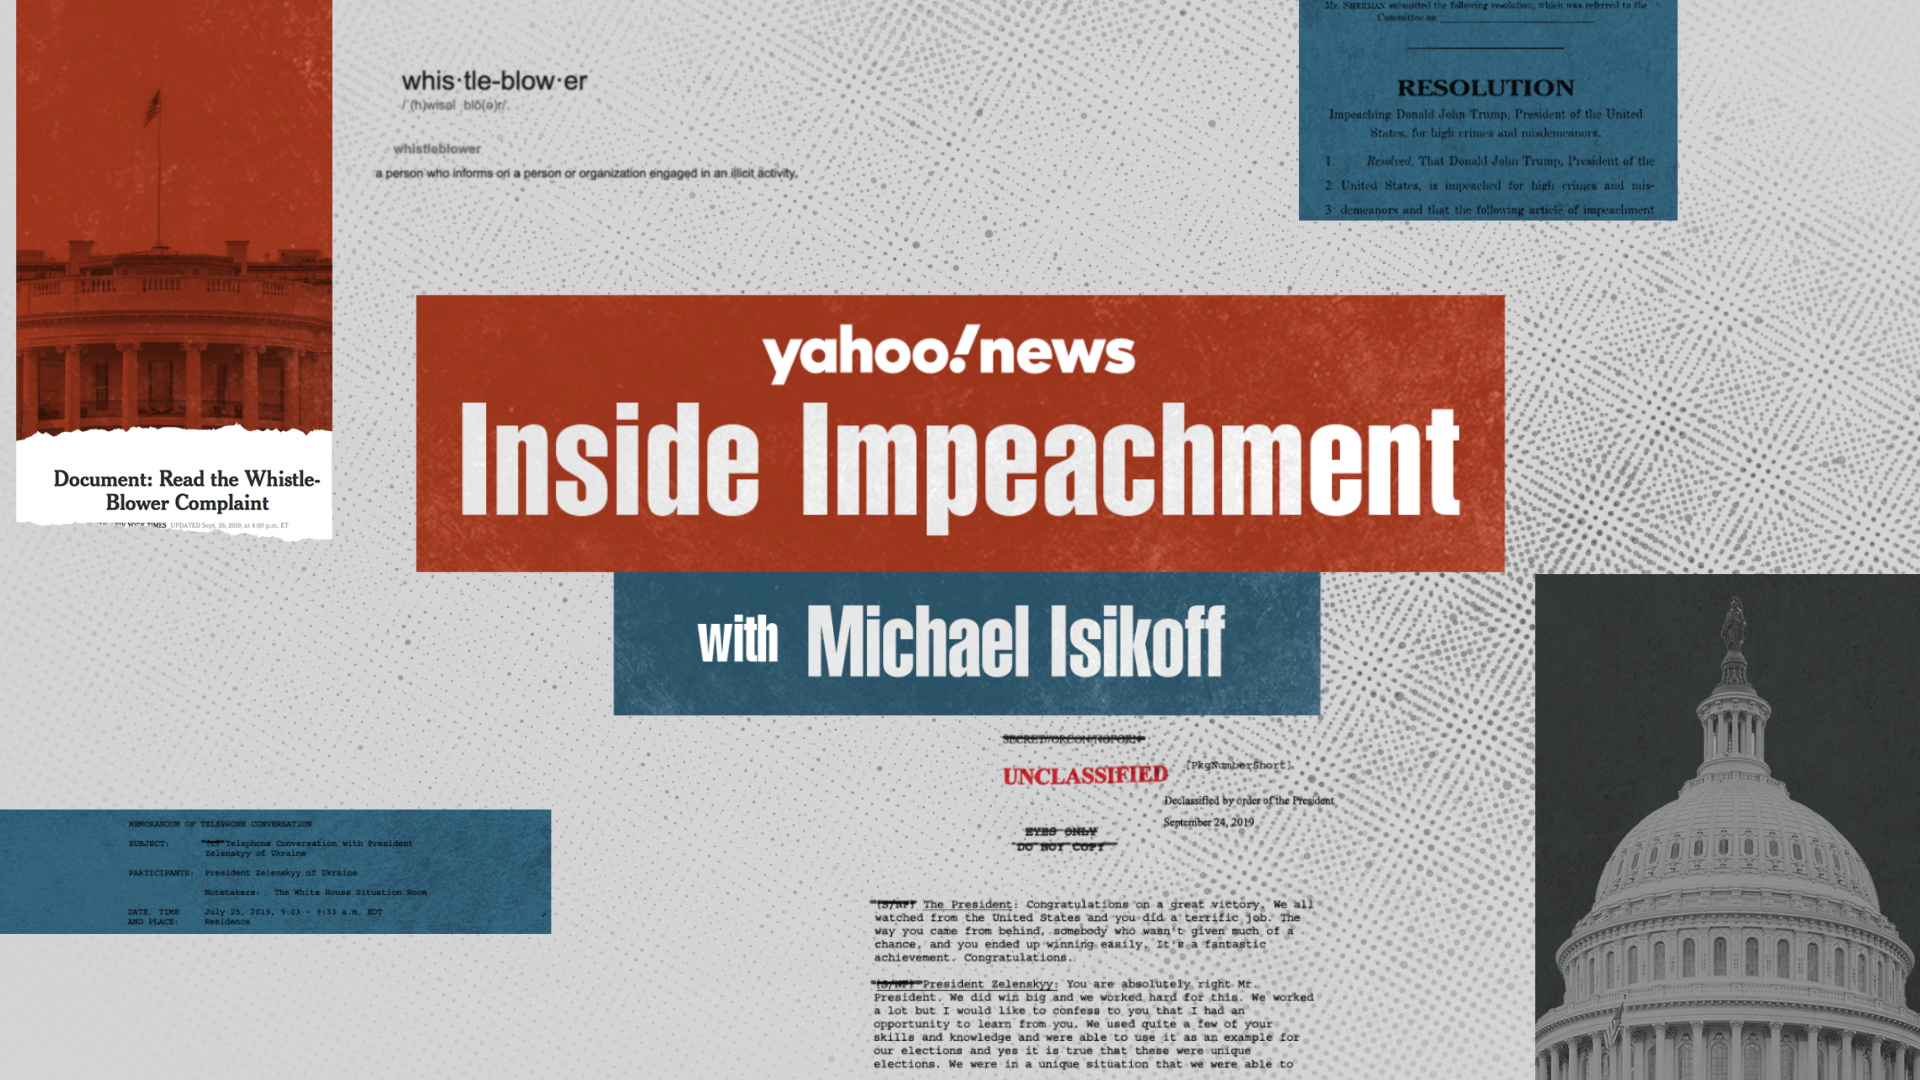 Inside Impeachment: State of the Union on the eve of expected acquittal